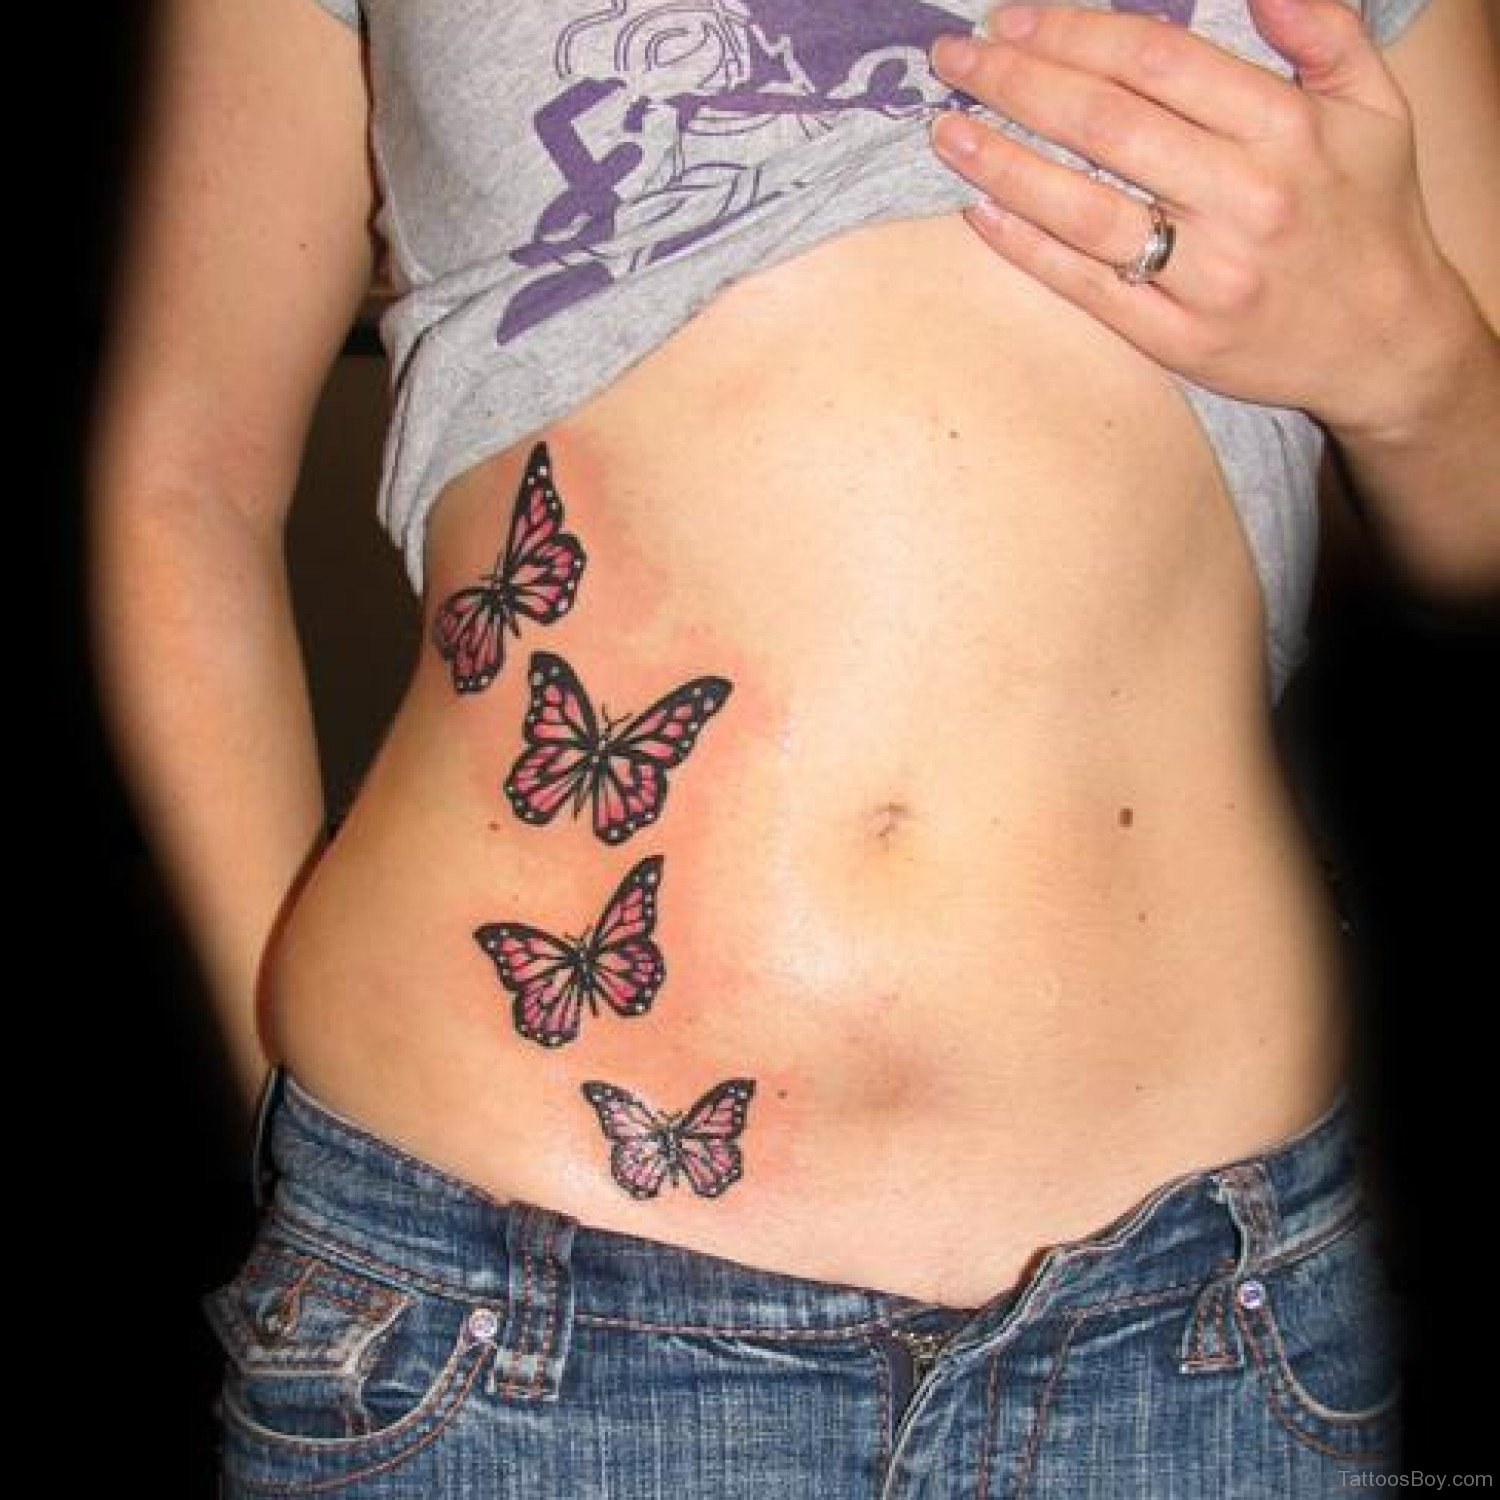 Butterfly Tattoo Design On Stomach Tattoo Designs Tattoo Pictures within size 1500 X 1500